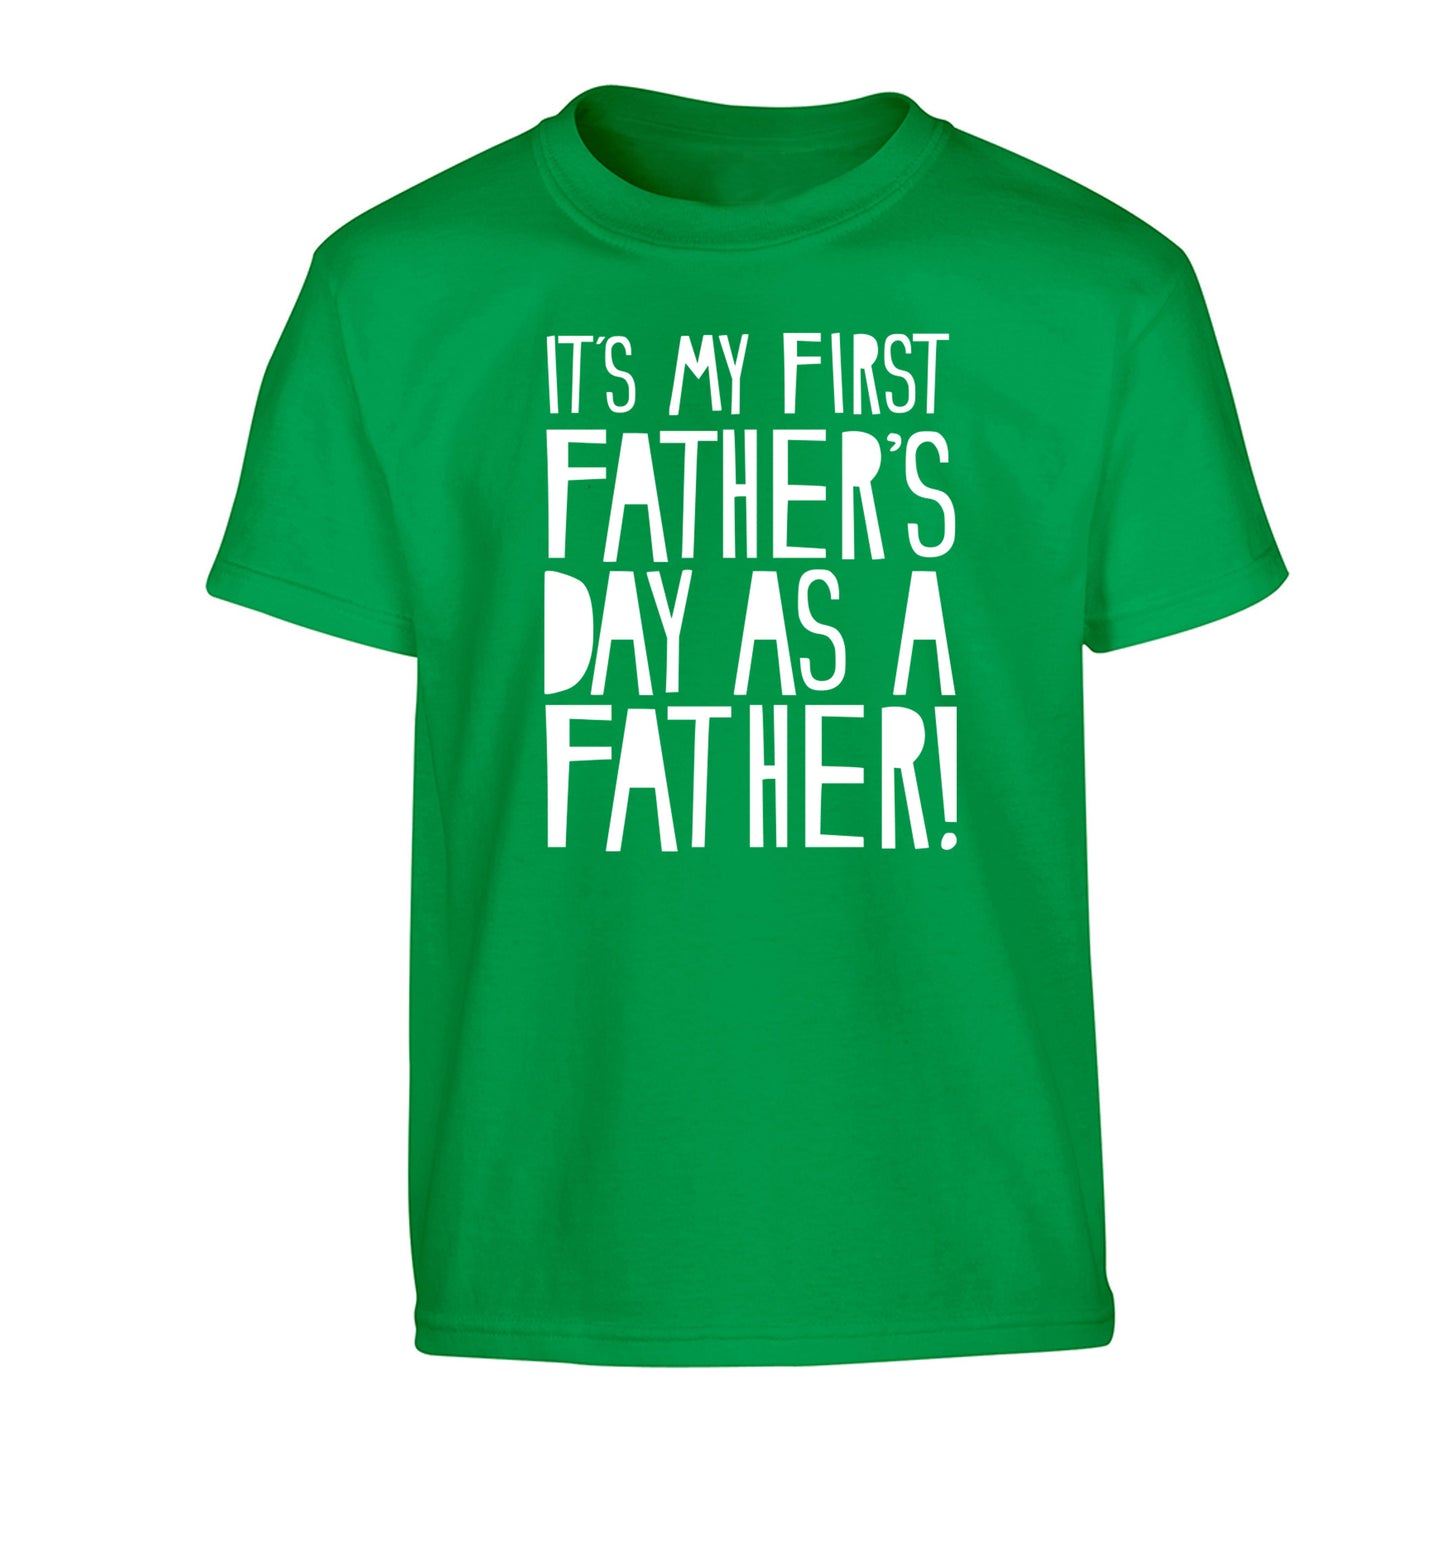 It's my first Father's Day as a father! Children's green Tshirt 12-13 Years